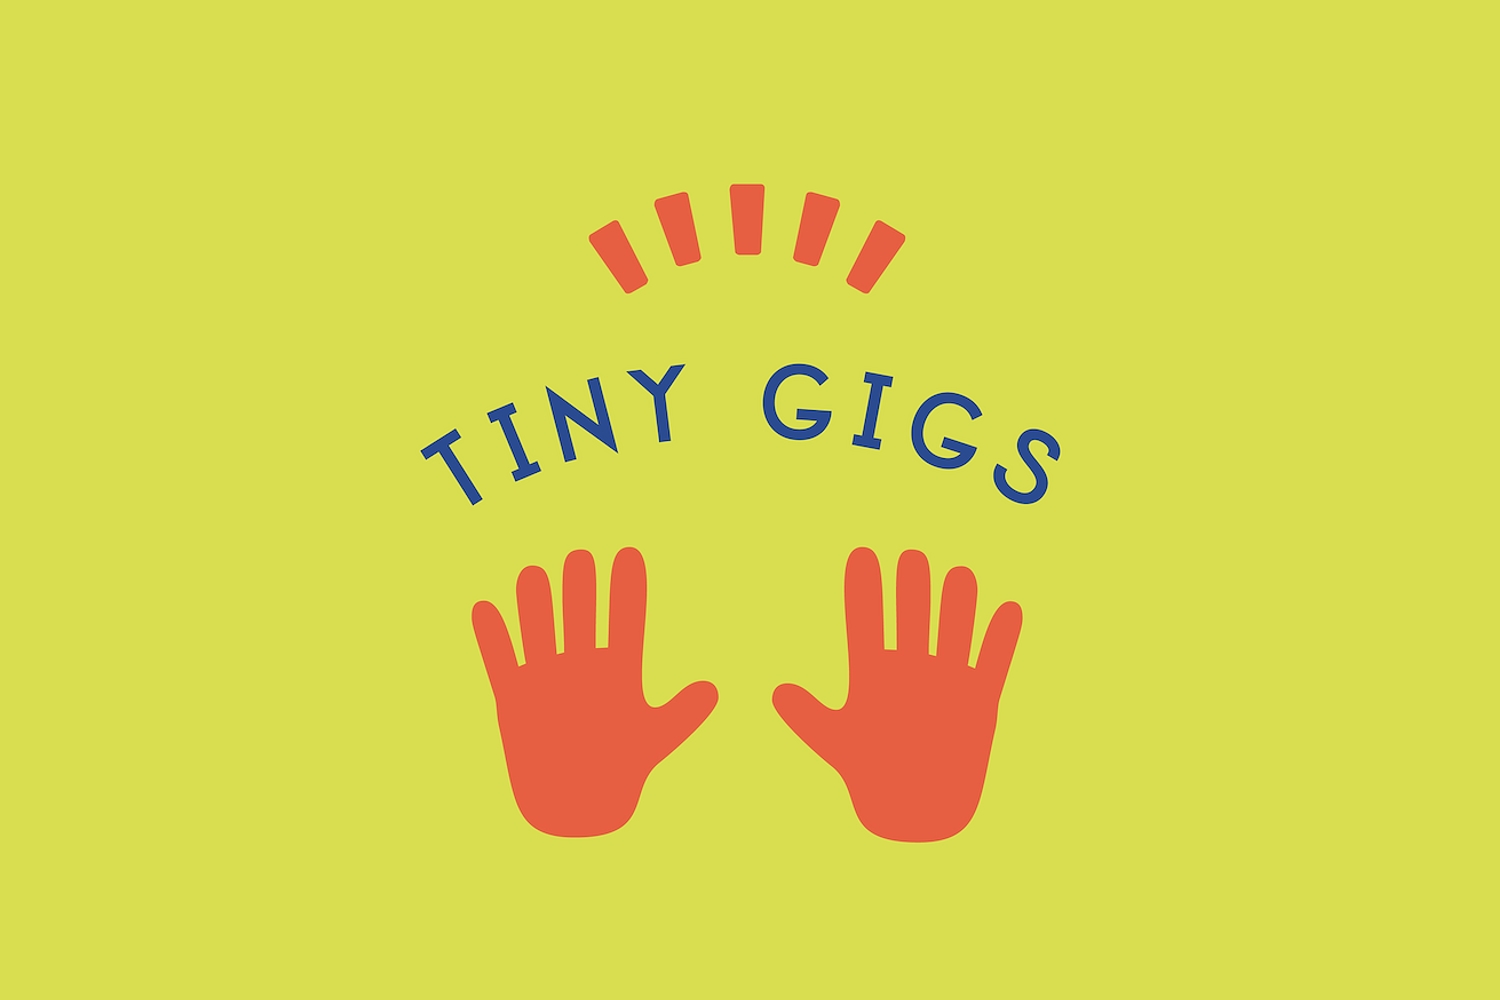 Tiny Changes announces Tiny Gigs